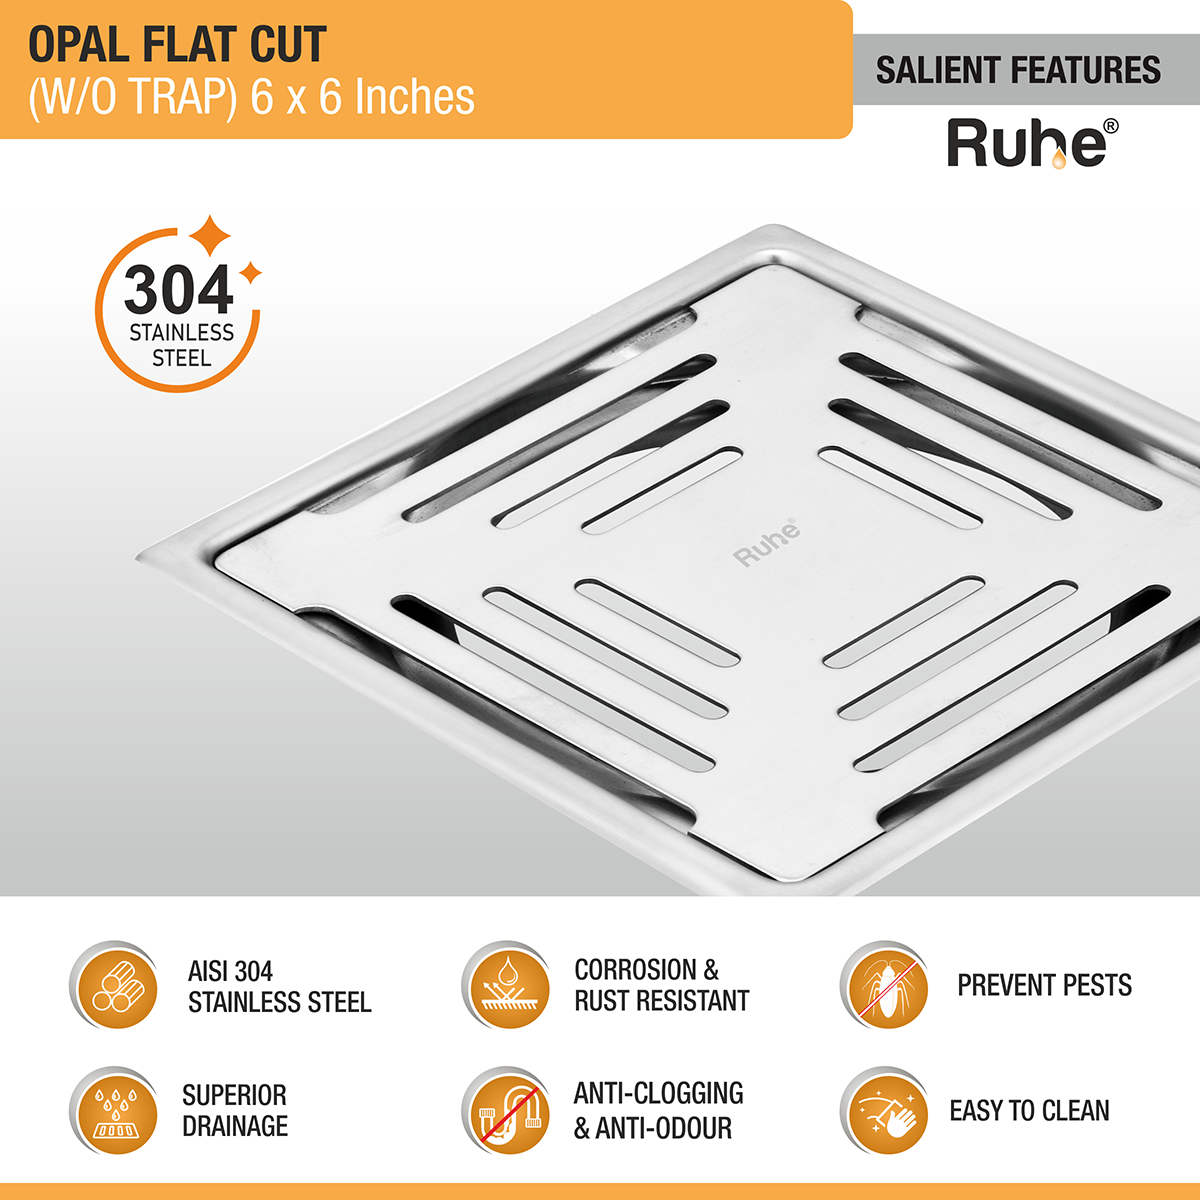 Opal Square Flat Cut 304-Grade Floor Drain (6 x 6 Inches) features and benefits